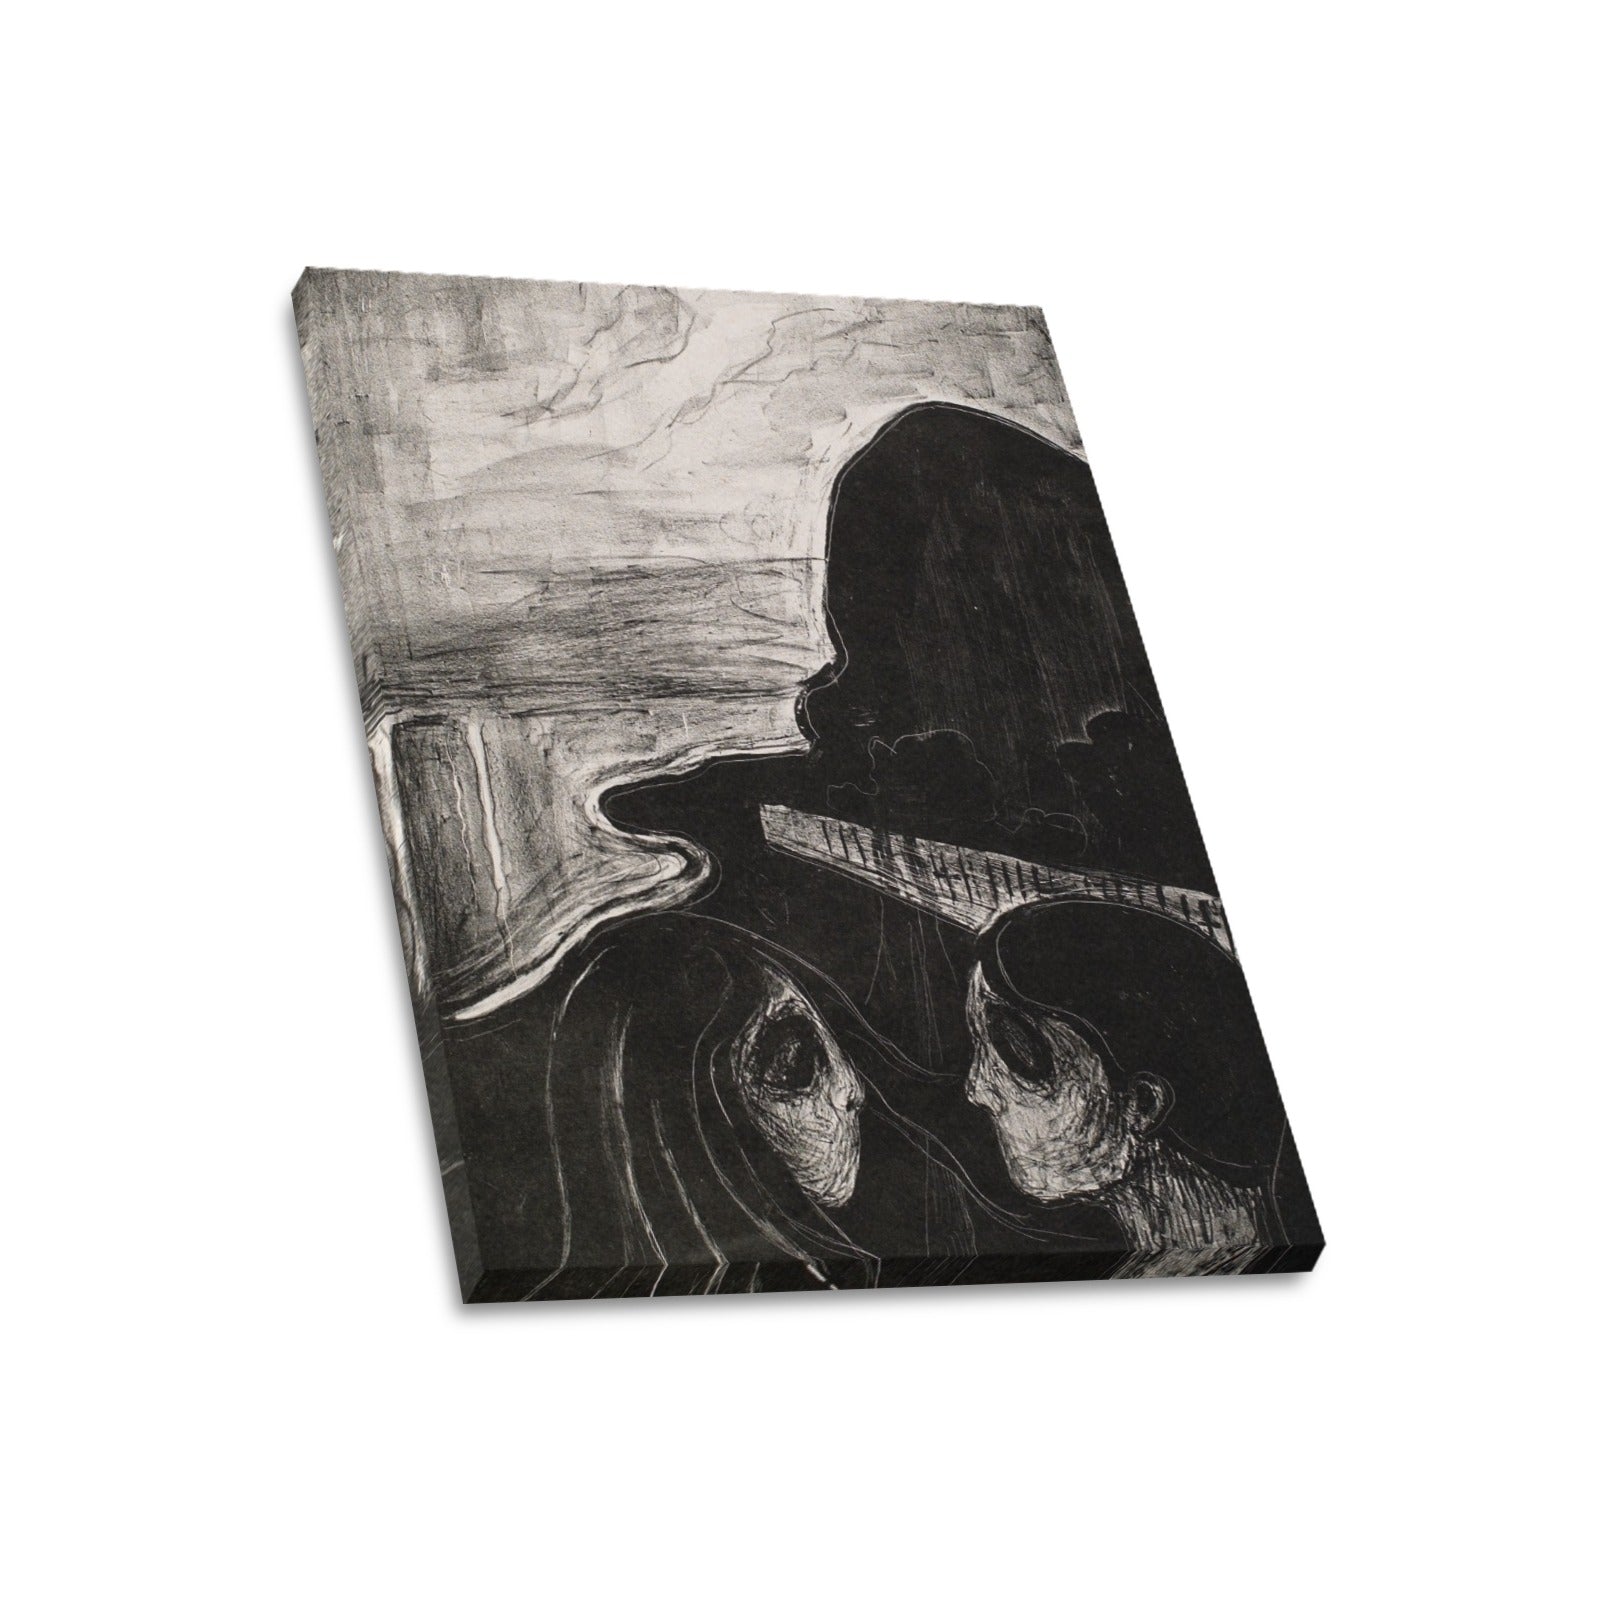 EDVARD MUNCH - ATTRACTION I - WRAPPED CANVAS PRINT 20" x 24"